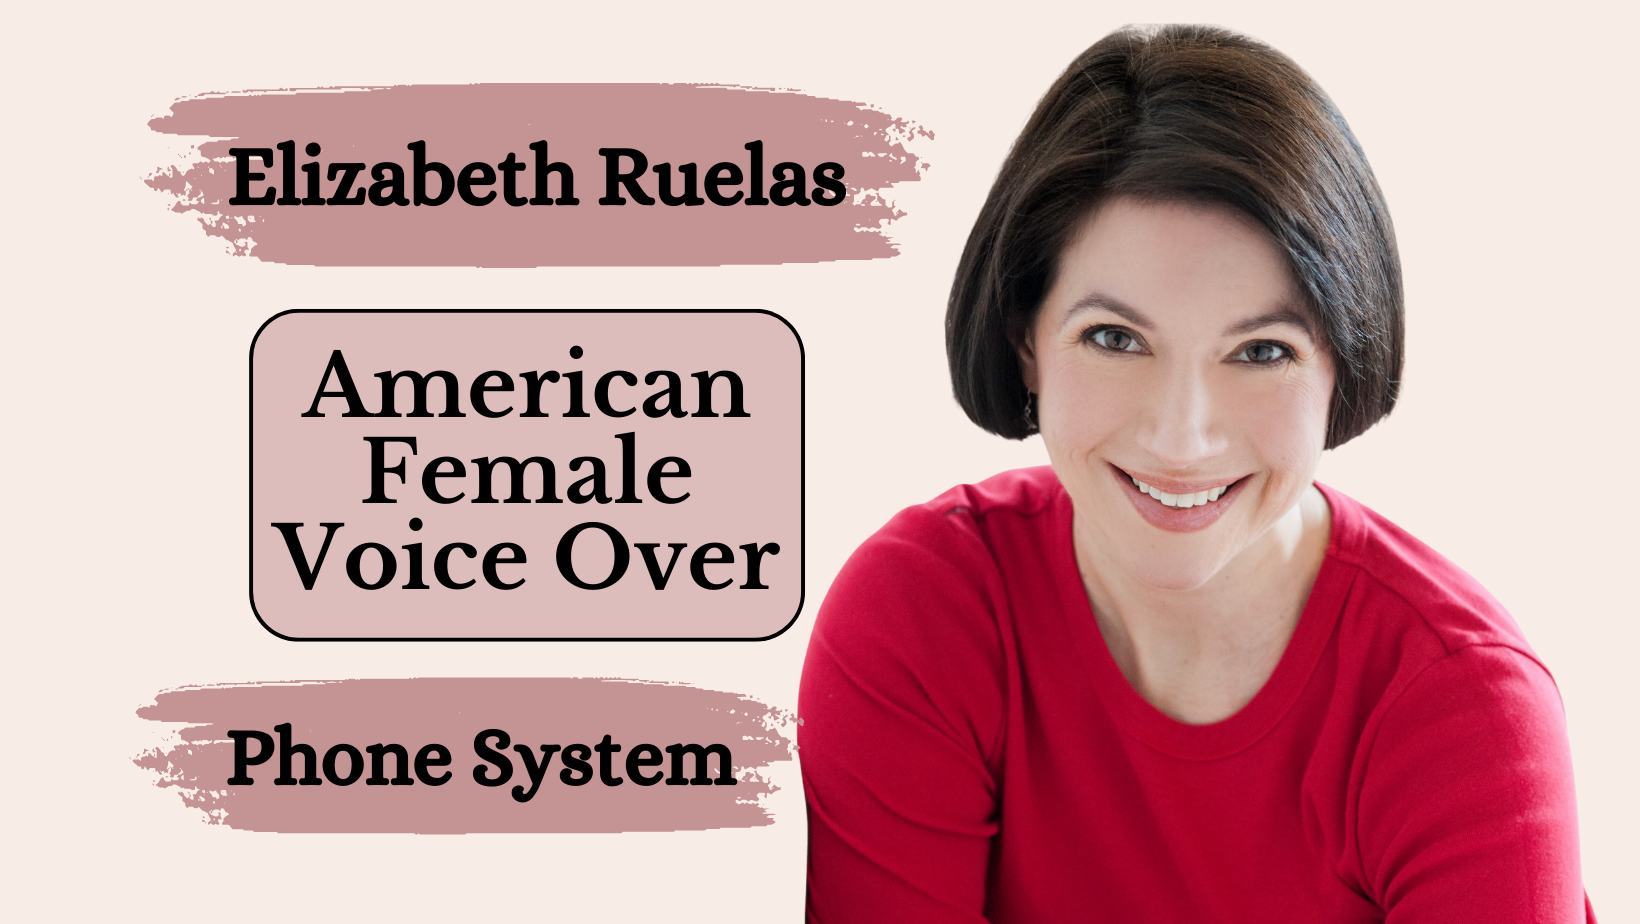 Friendly, Professional Female Voice for your Phone Greeting or Voicemail